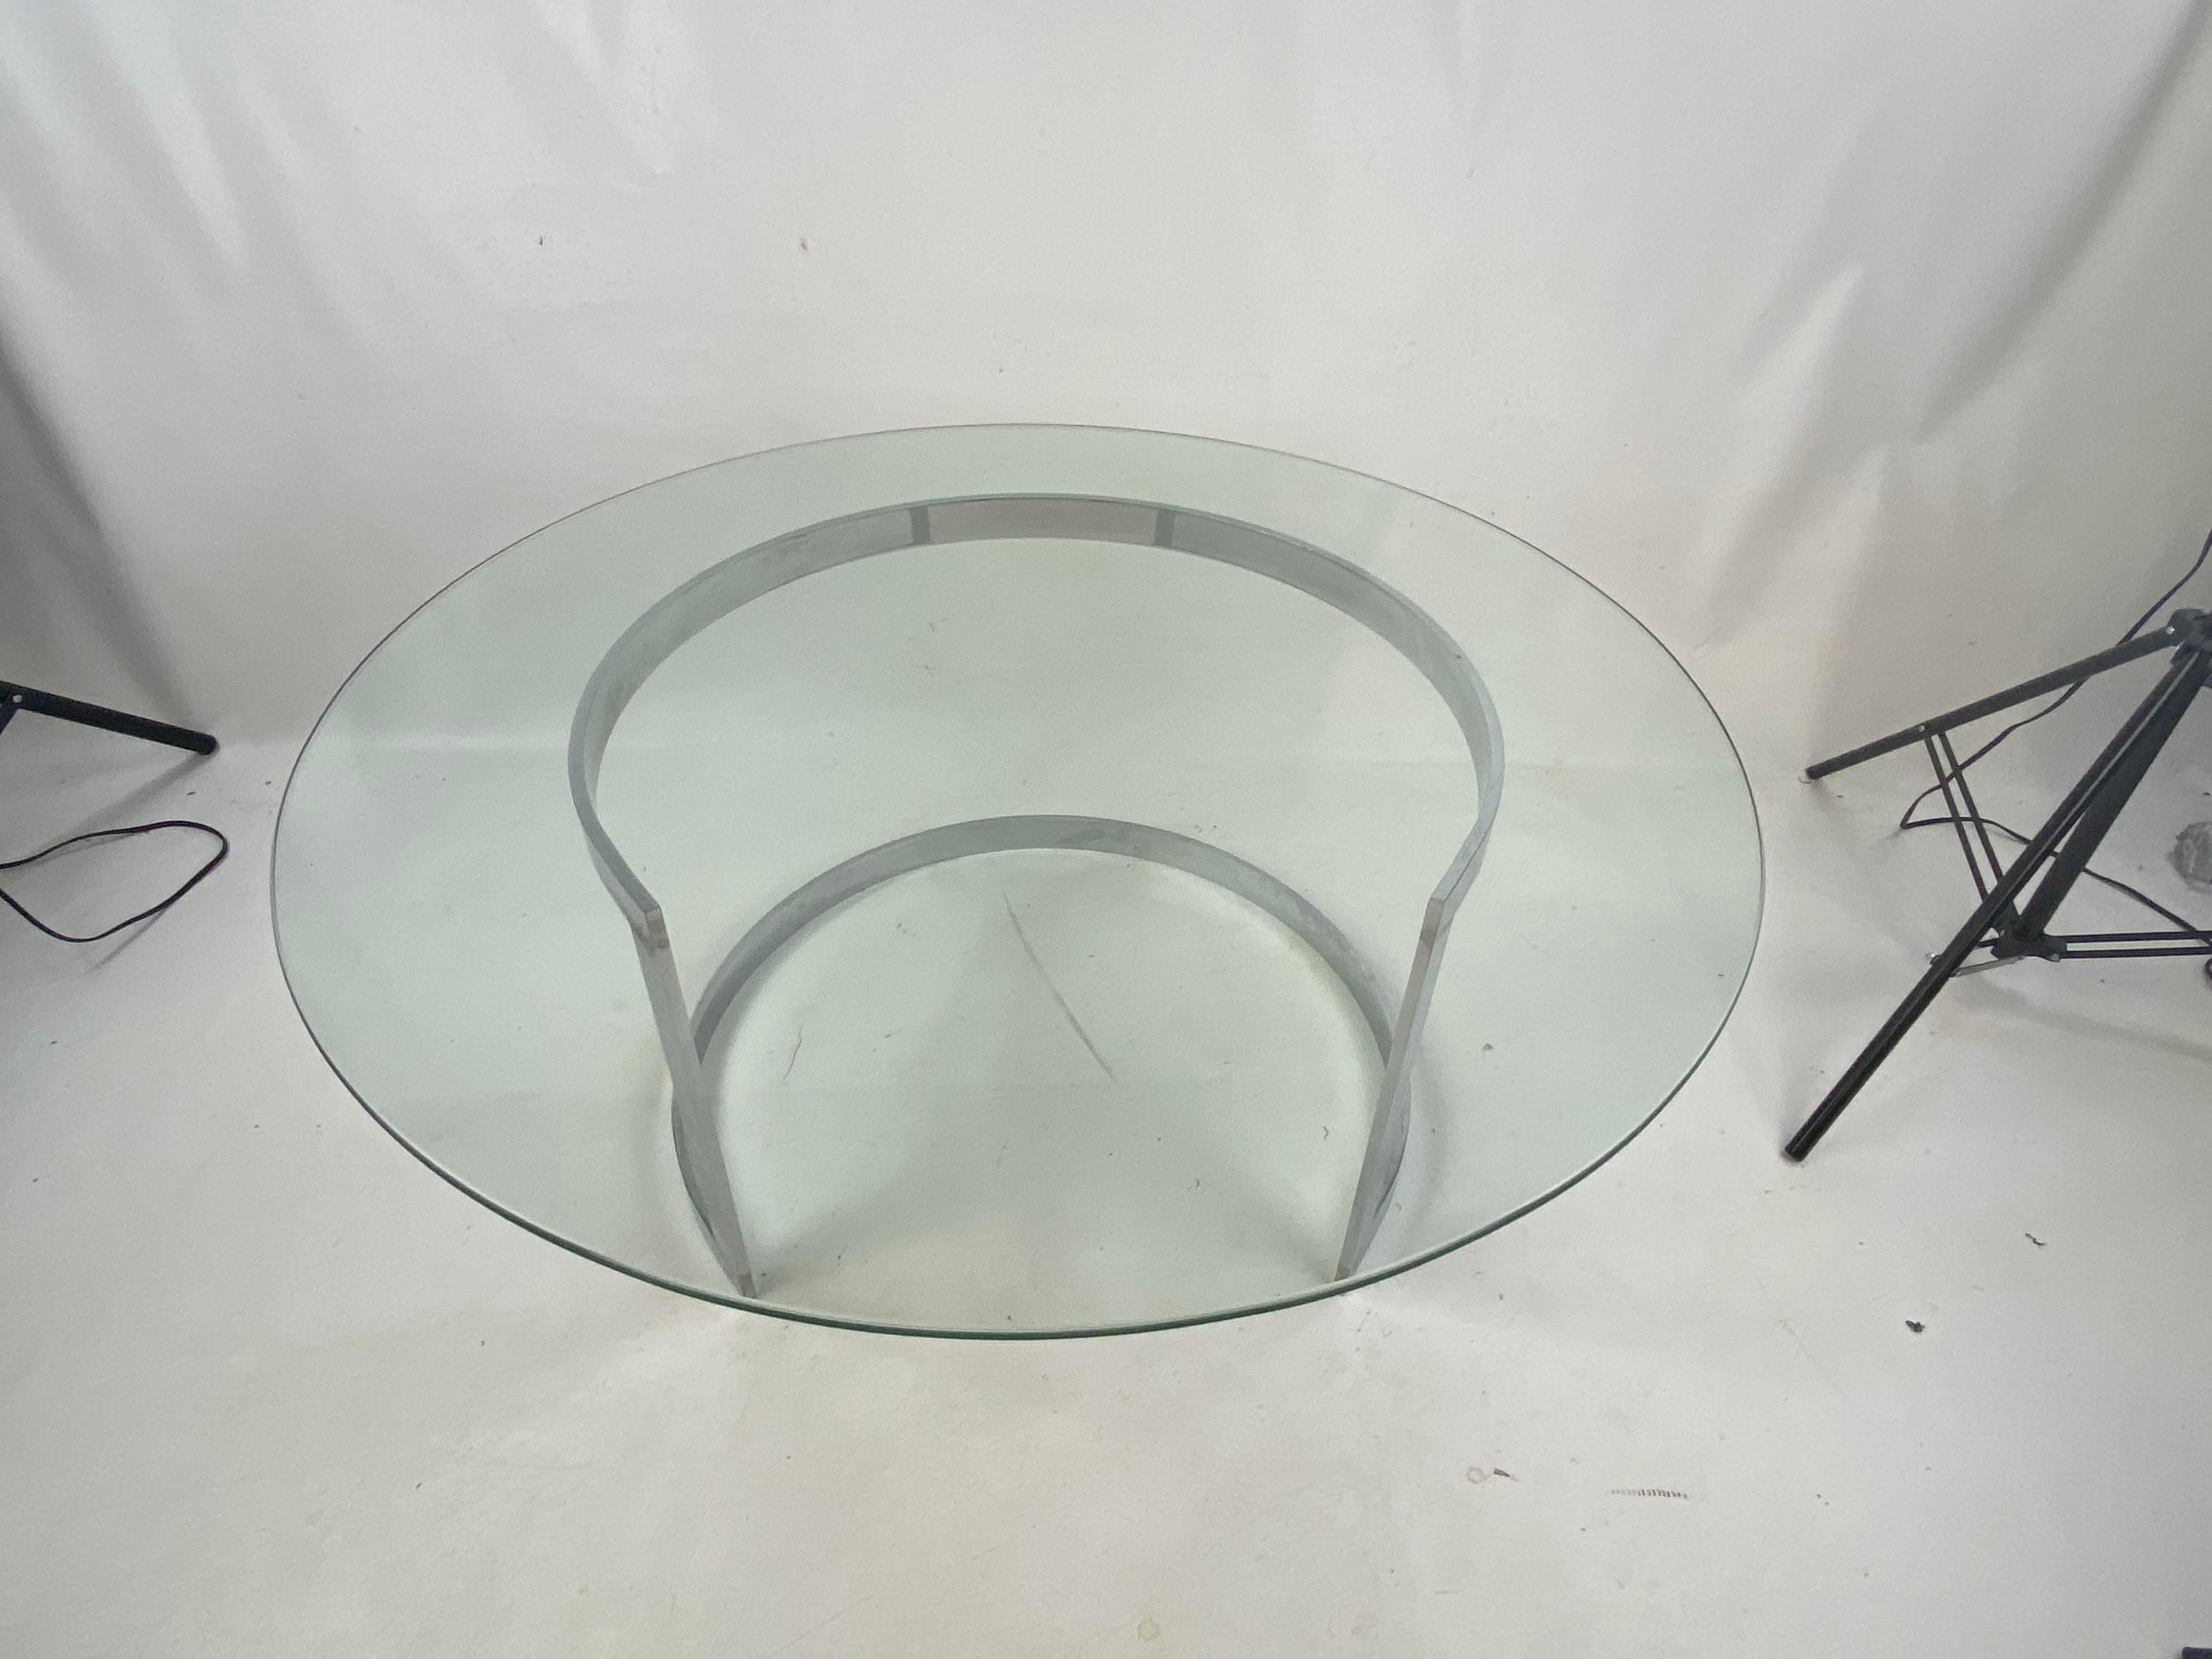 Midcentury stainless steel crescent coffee table attributed to Milo Baughman.